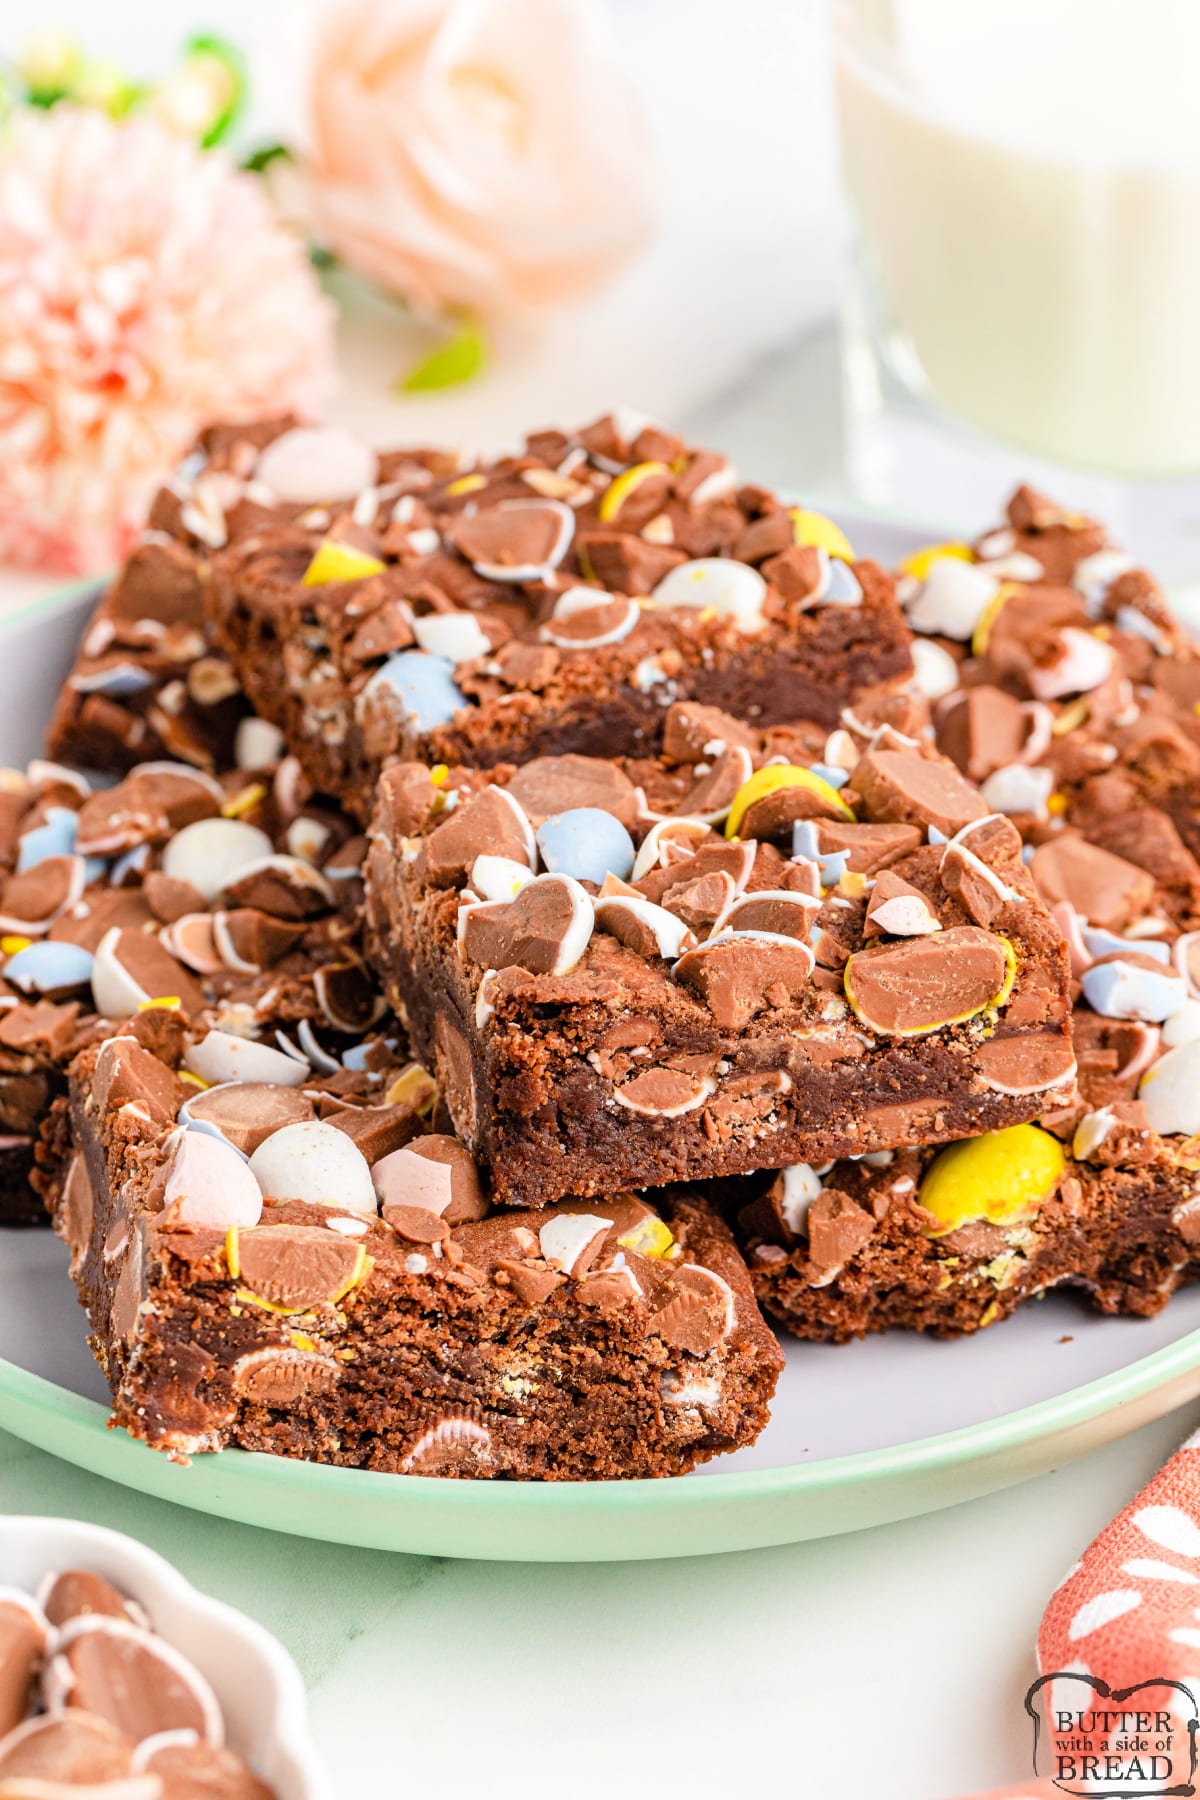 Cadbury Mini Egg Brownies are rich, fudgy, and decadent. Only a few minutes of prep time to make this delicious brownie recipe that is made from scratch and packed with Cadbury Mini Eggs!